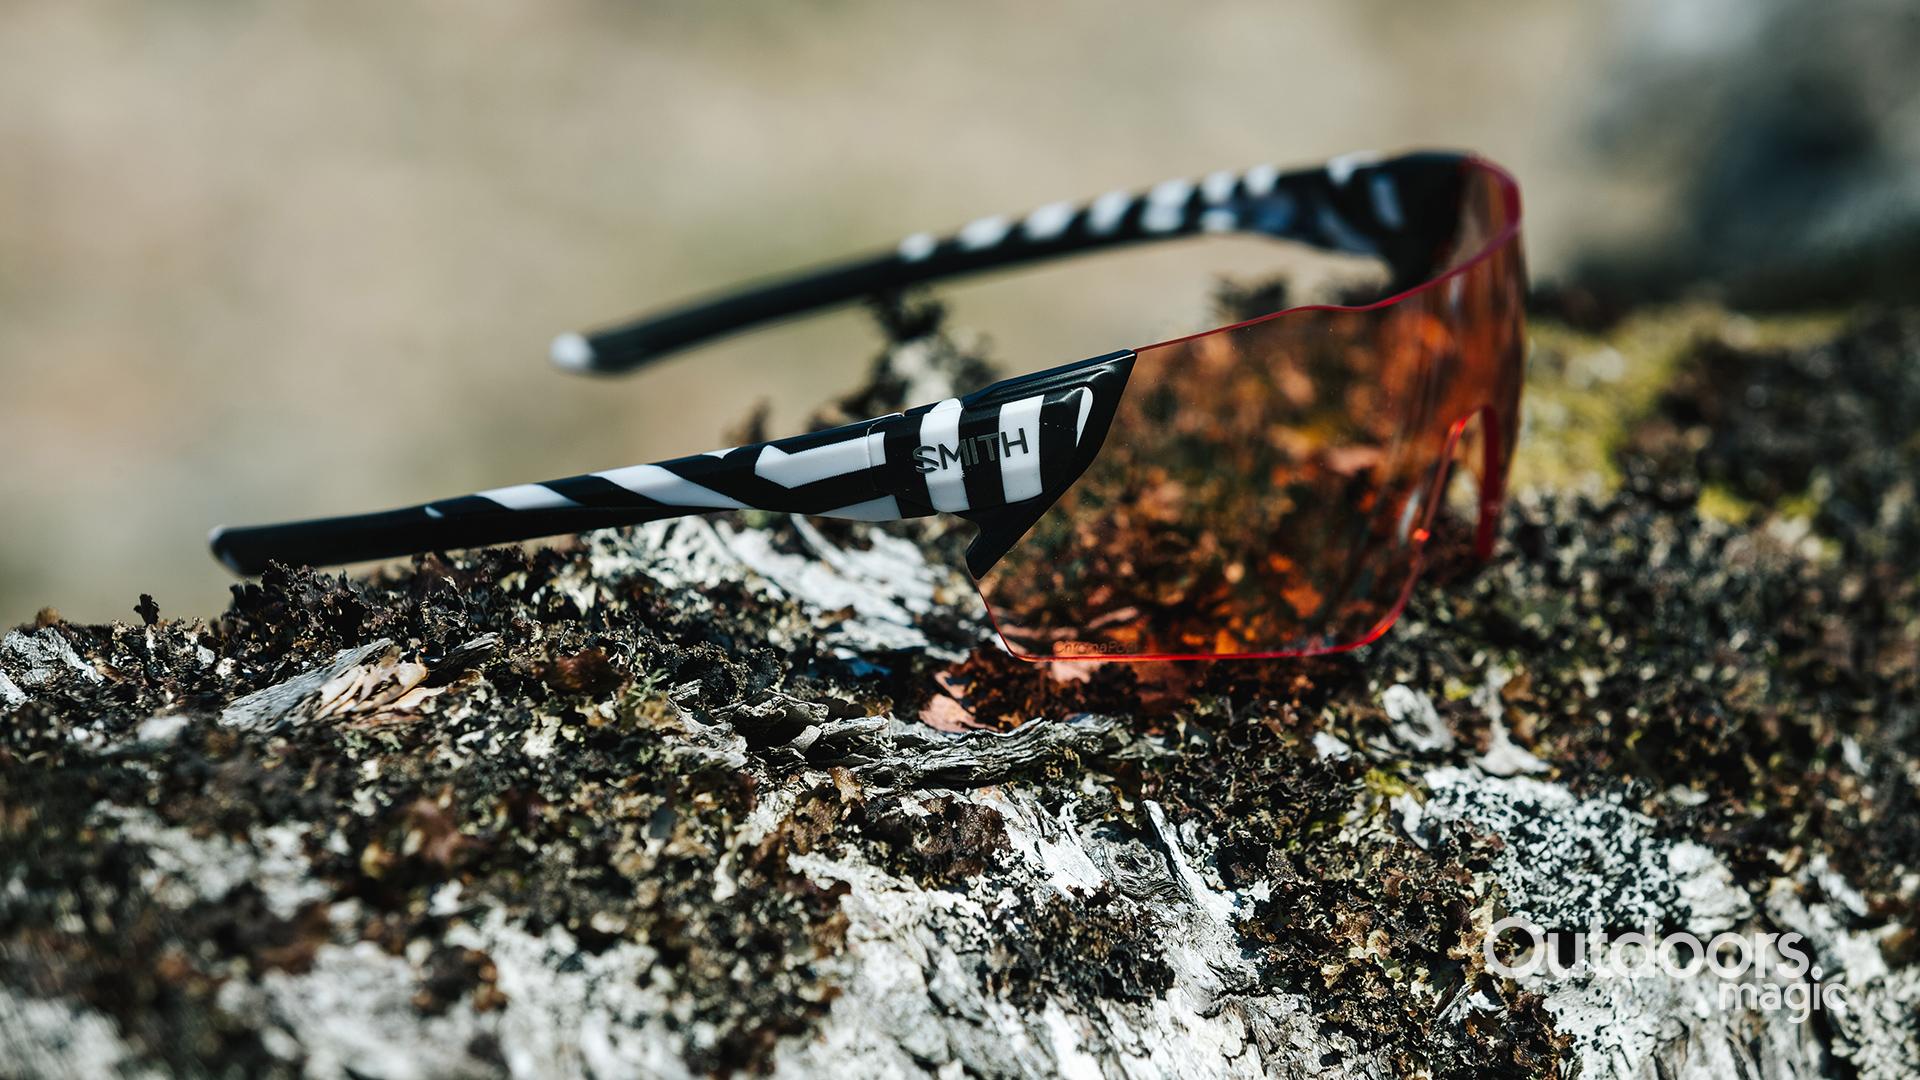 Smith Attack Sunglasses | Review